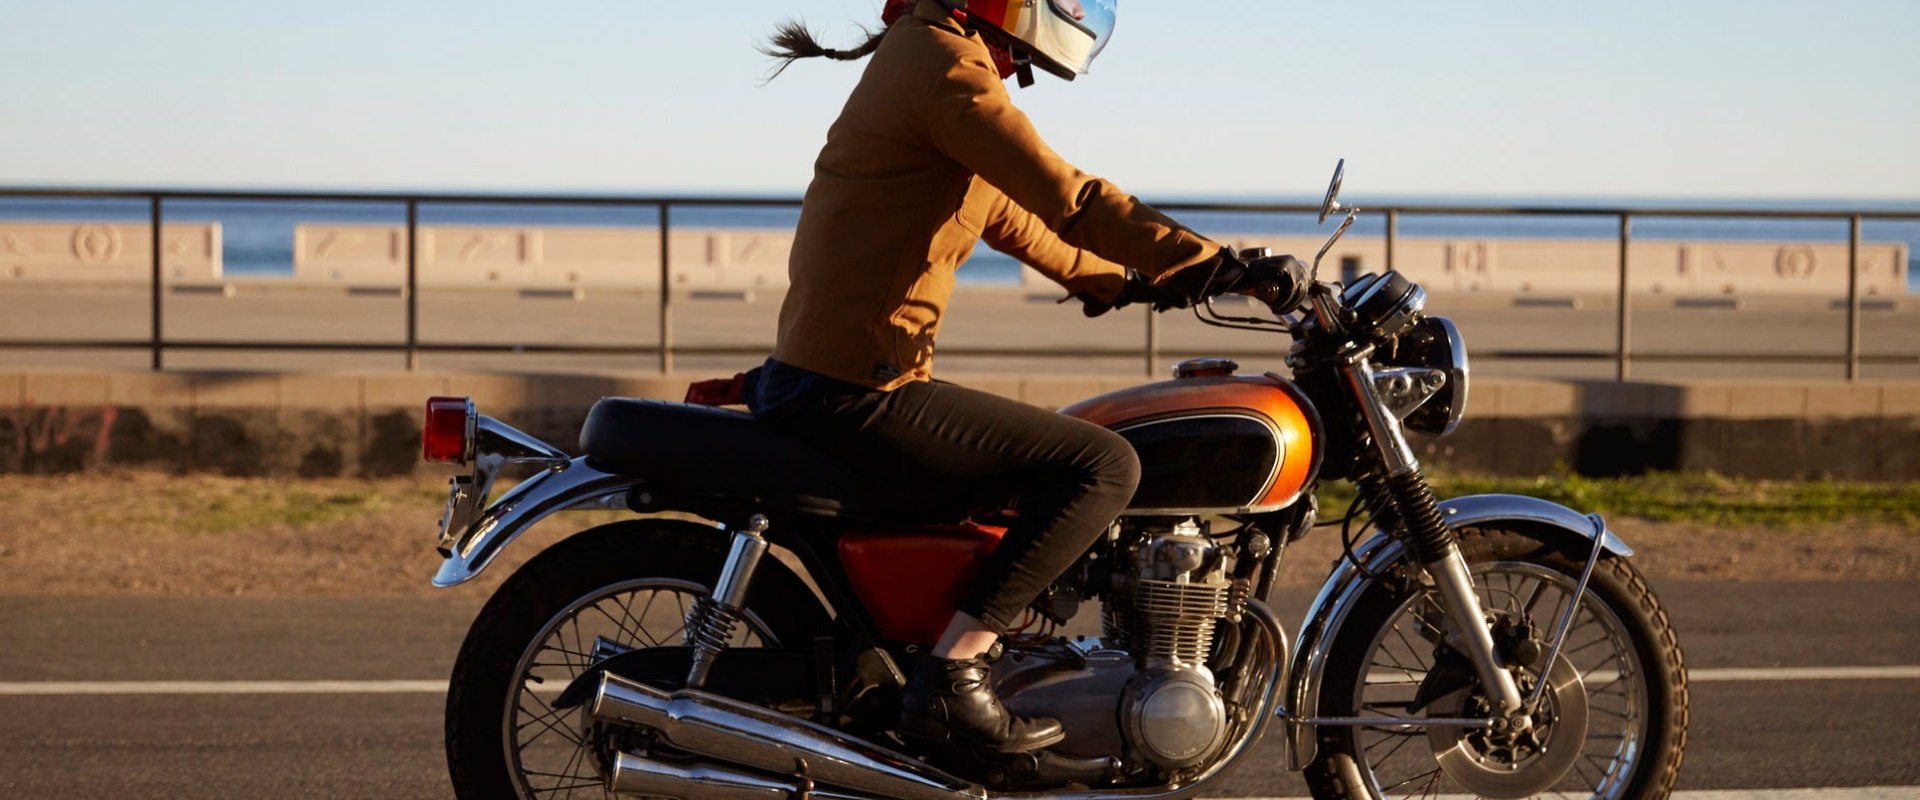 Personalized Options for First Time Riders with Motorcycle Insurance